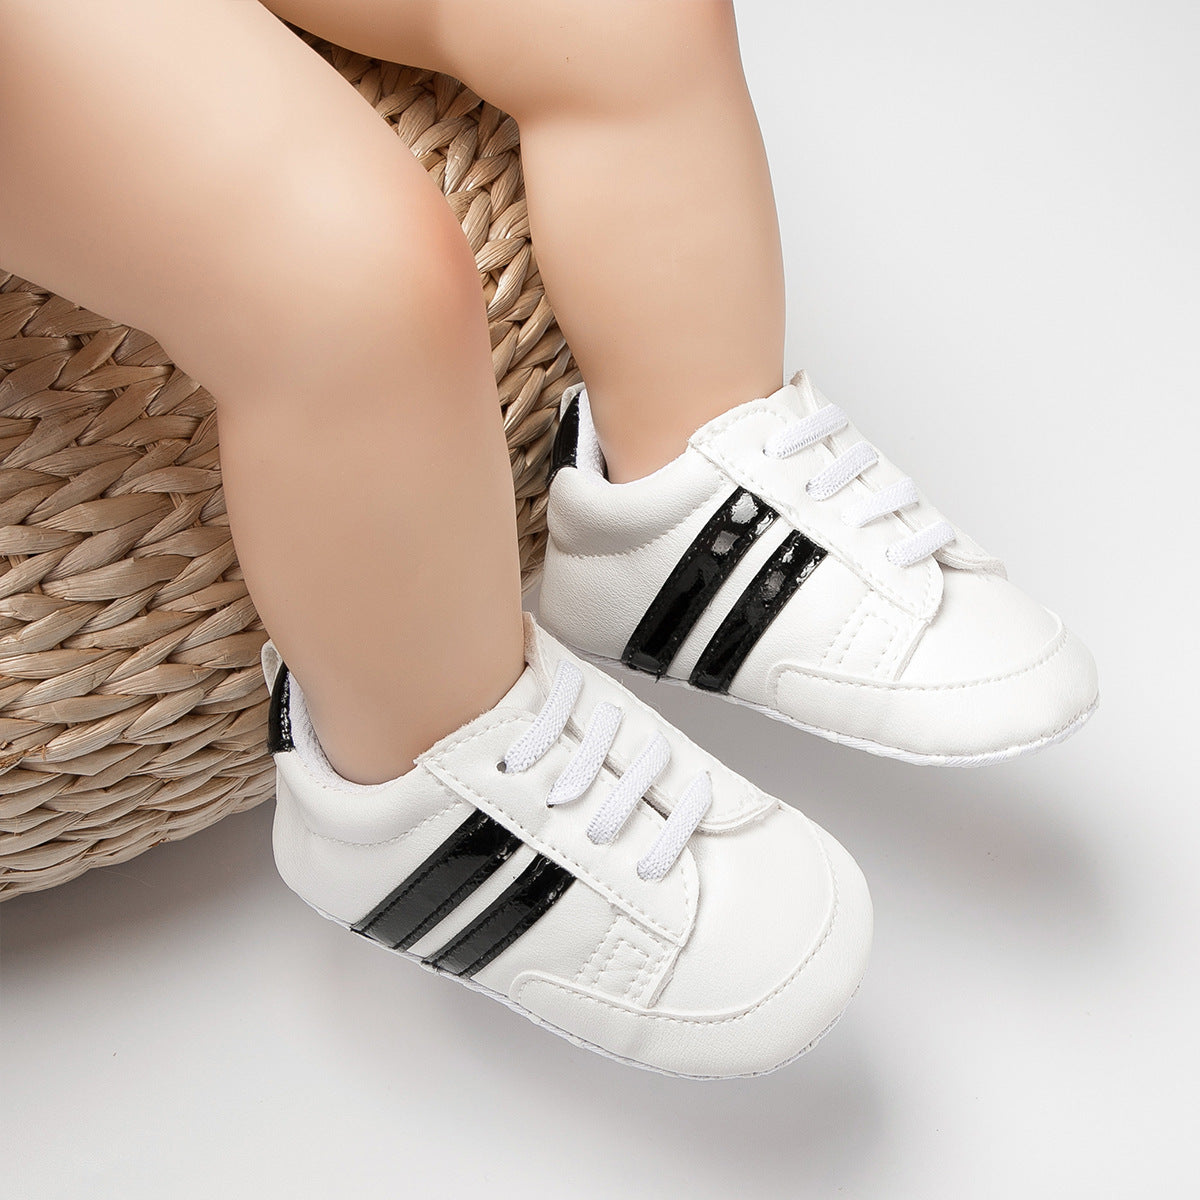 Baby Toddler Shoes For 0 1 Years Old Casual Baby Shoes Sneakers Baby's Shoes Baby Shoes